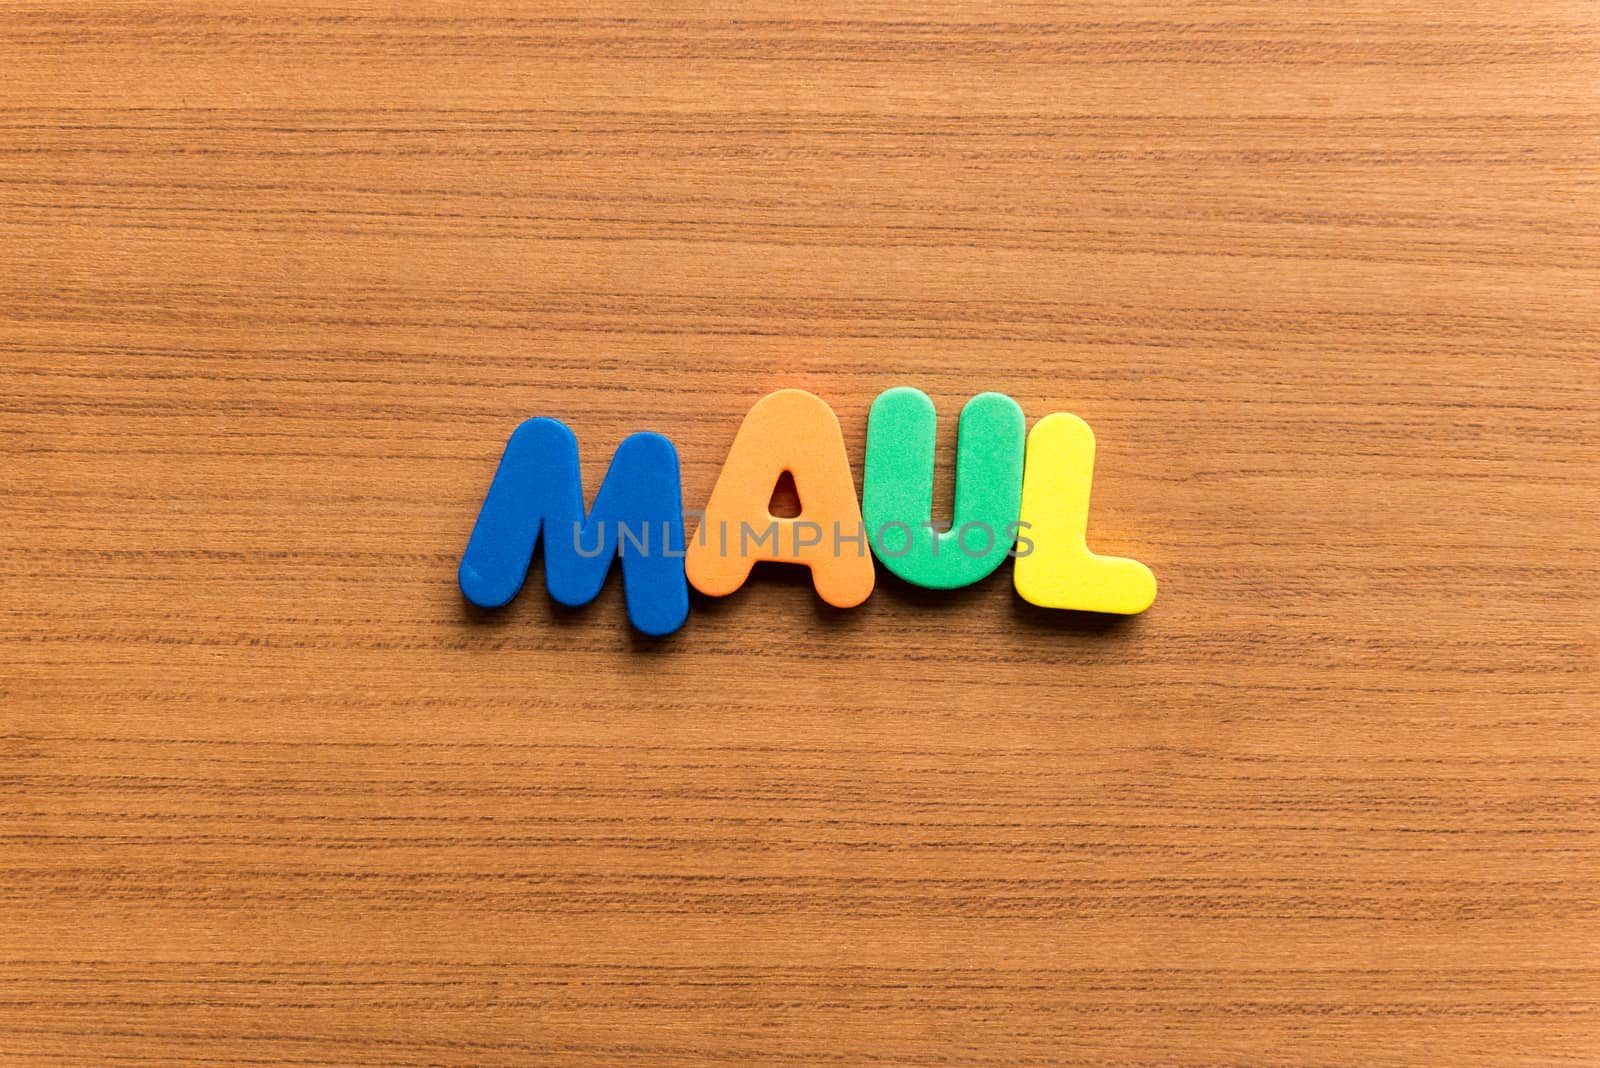 maul colorful word on the wooden background